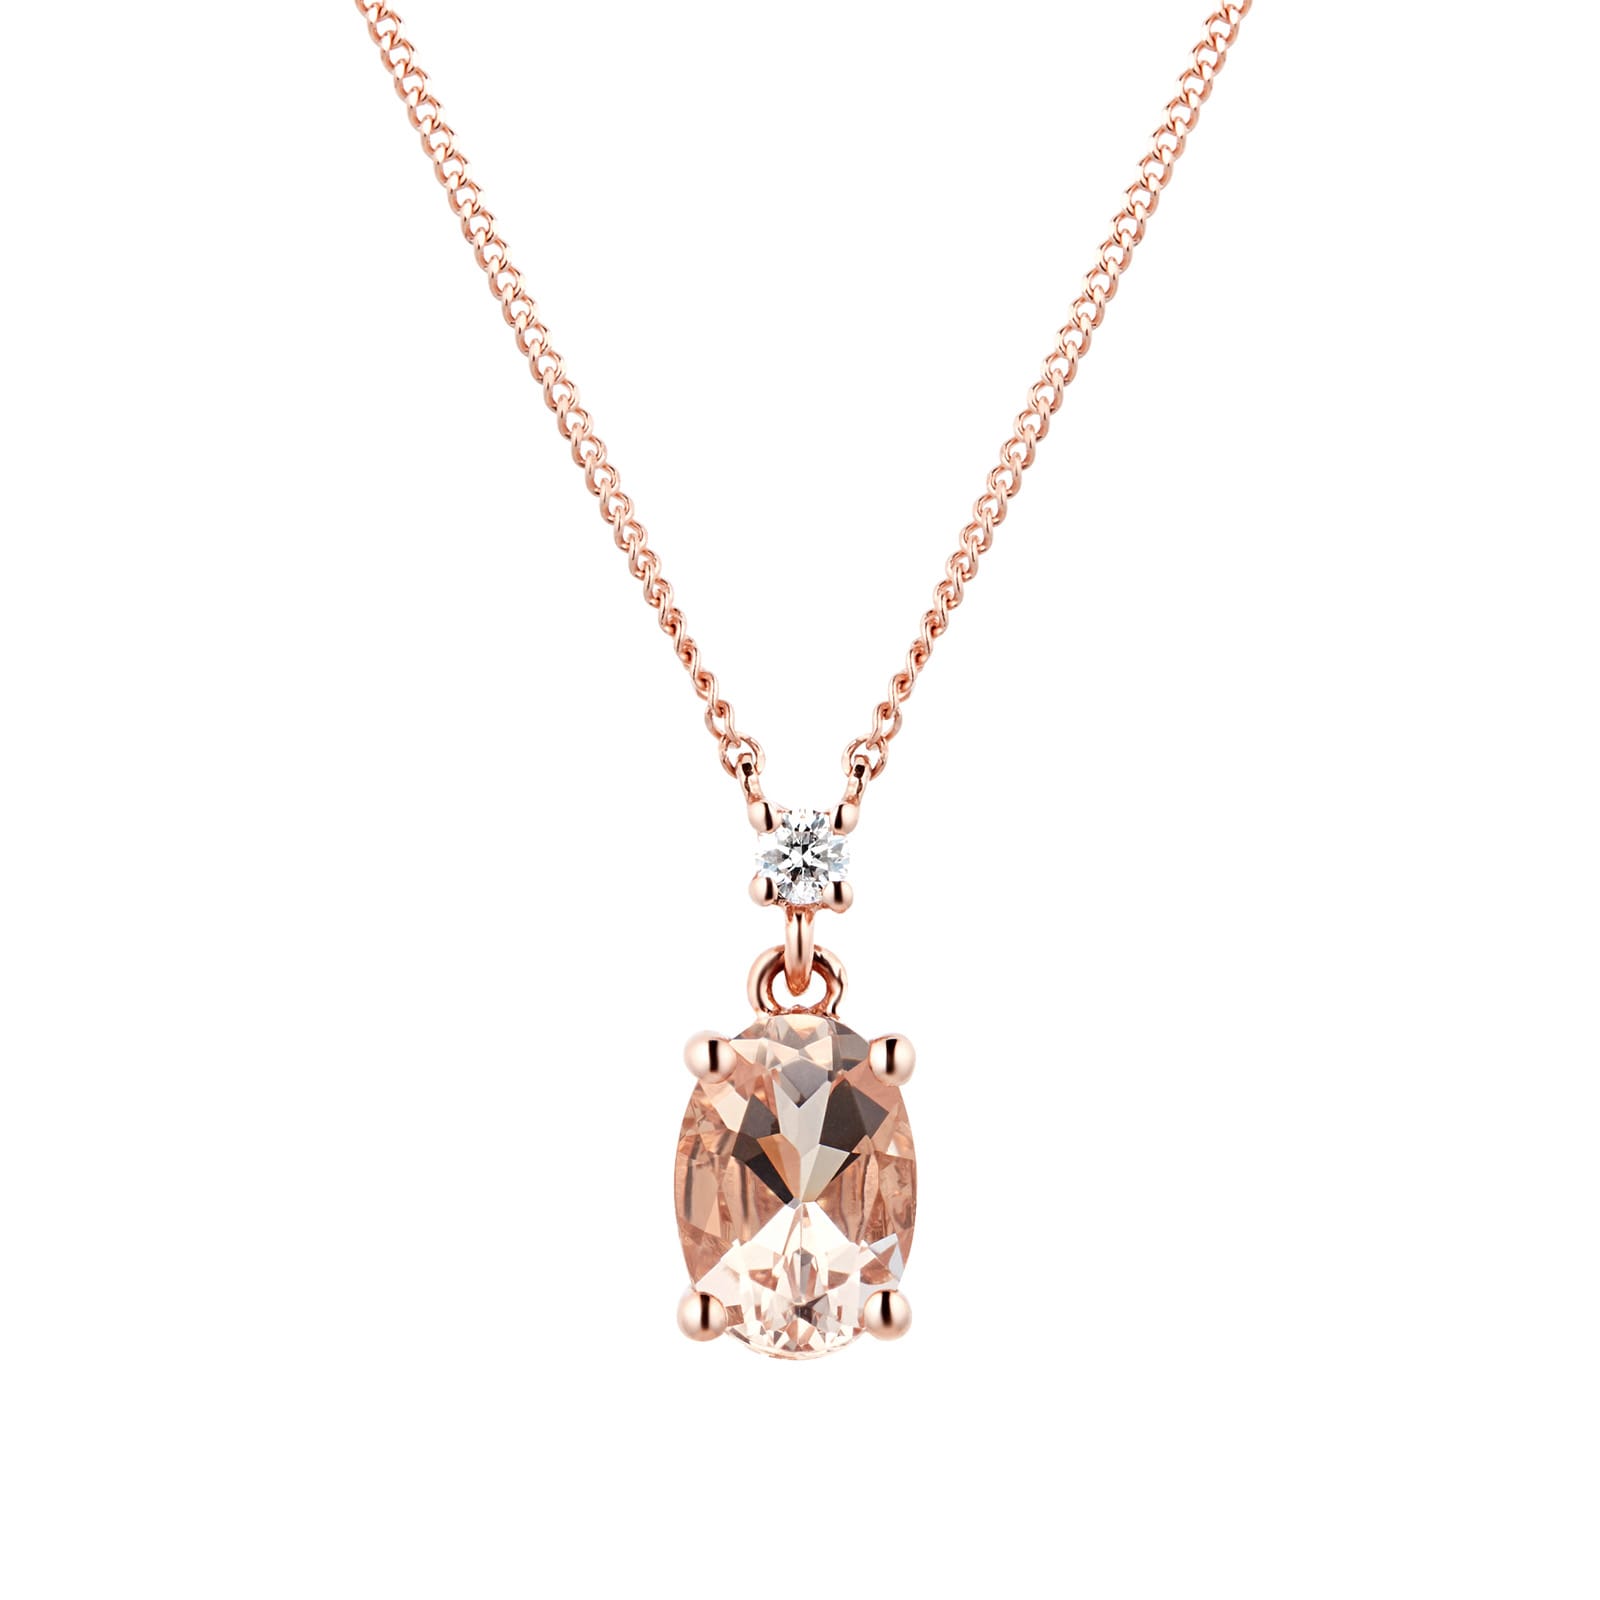 Round Cut Cubic Zirconia Pendant Necklace 2.38ct in 9ct Rose Gold | QP  Jewellers